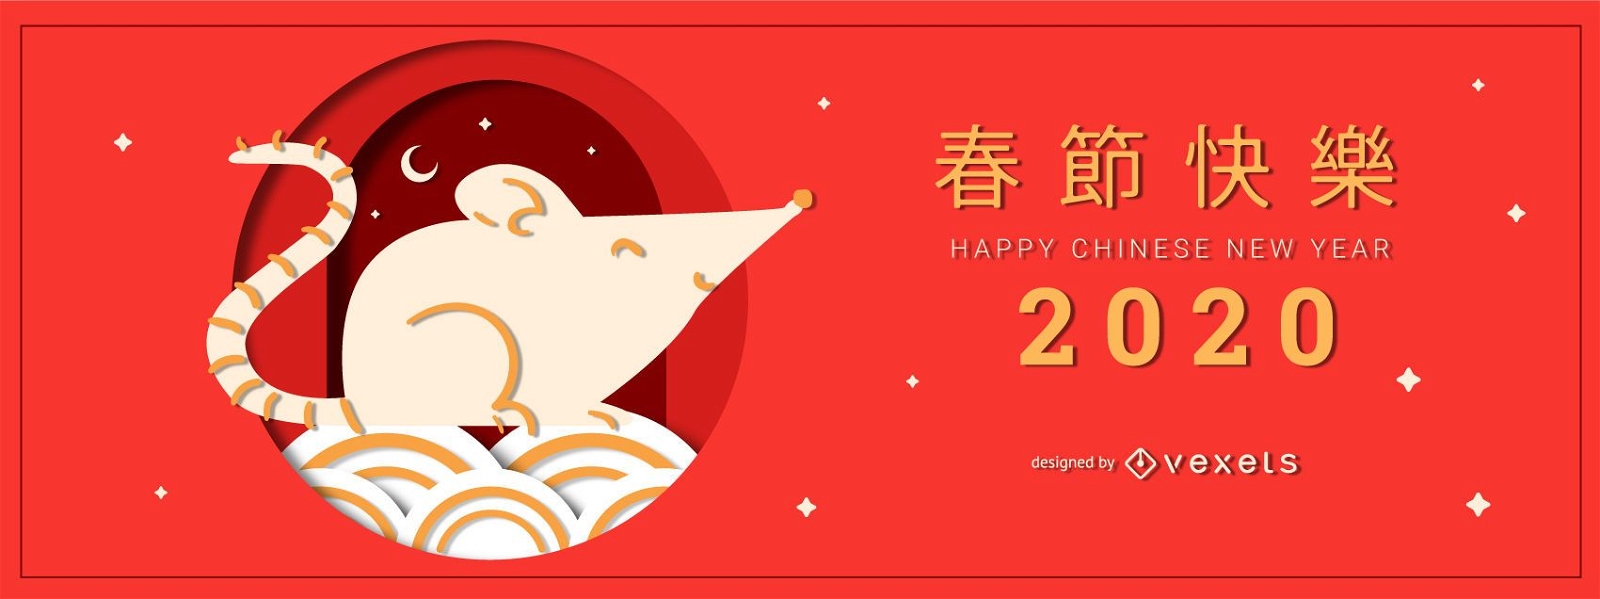 Chinese new year editable banner